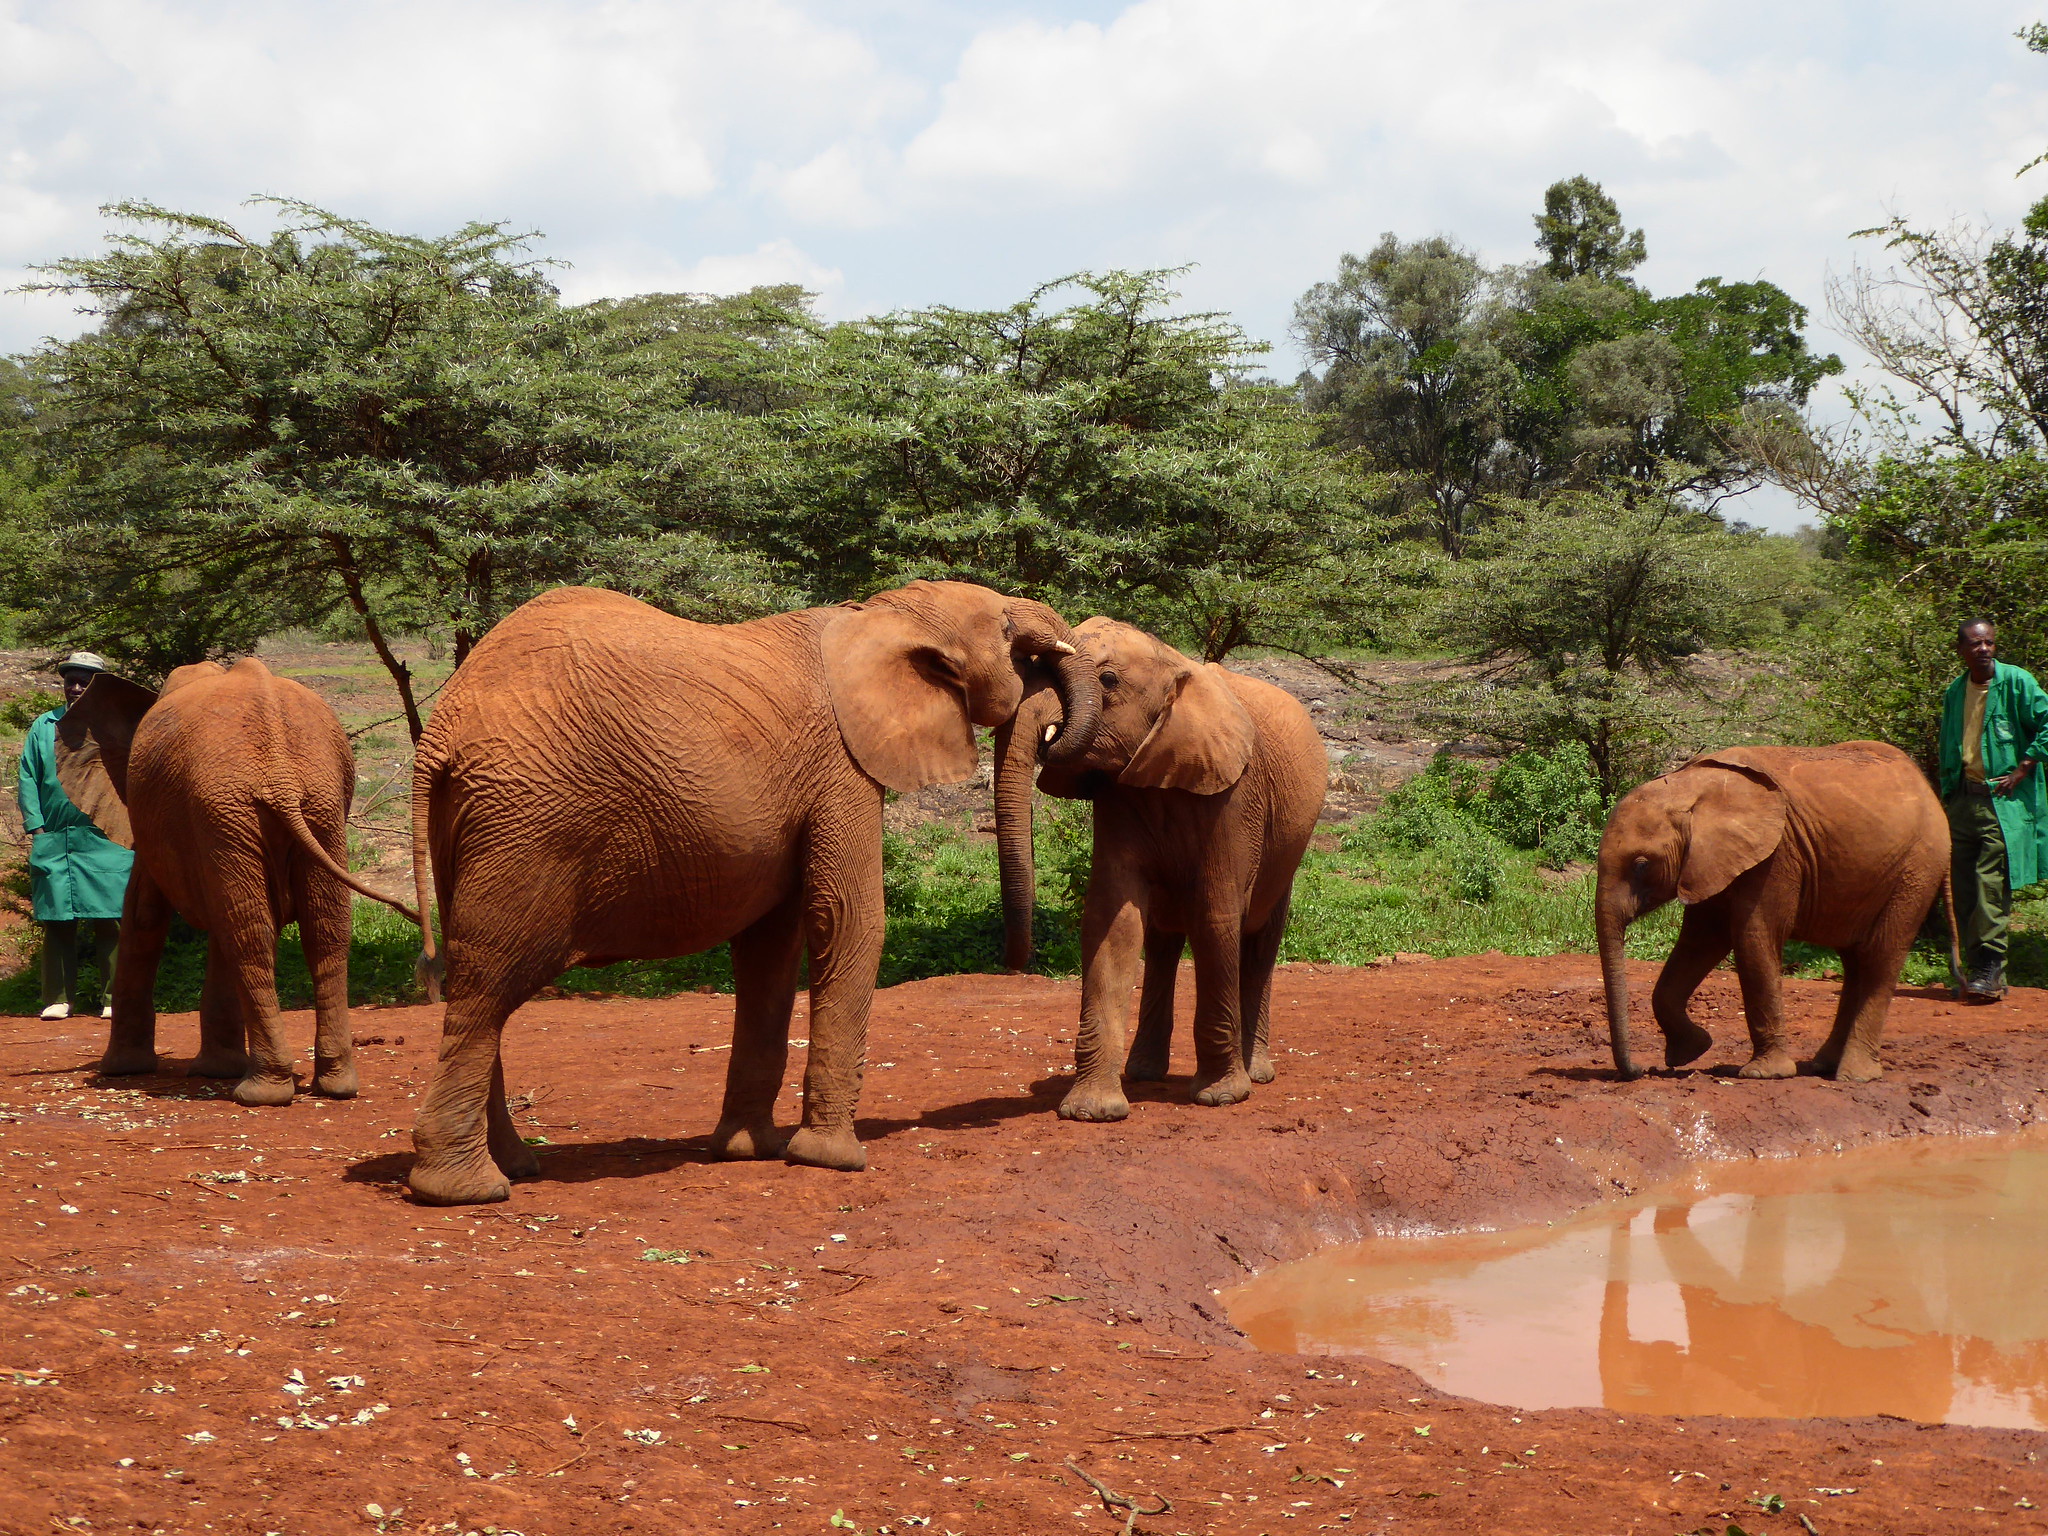 Young elephants play with each other near a mud puddle at at Sheldrick Wildlife Trust's Orphans' Project